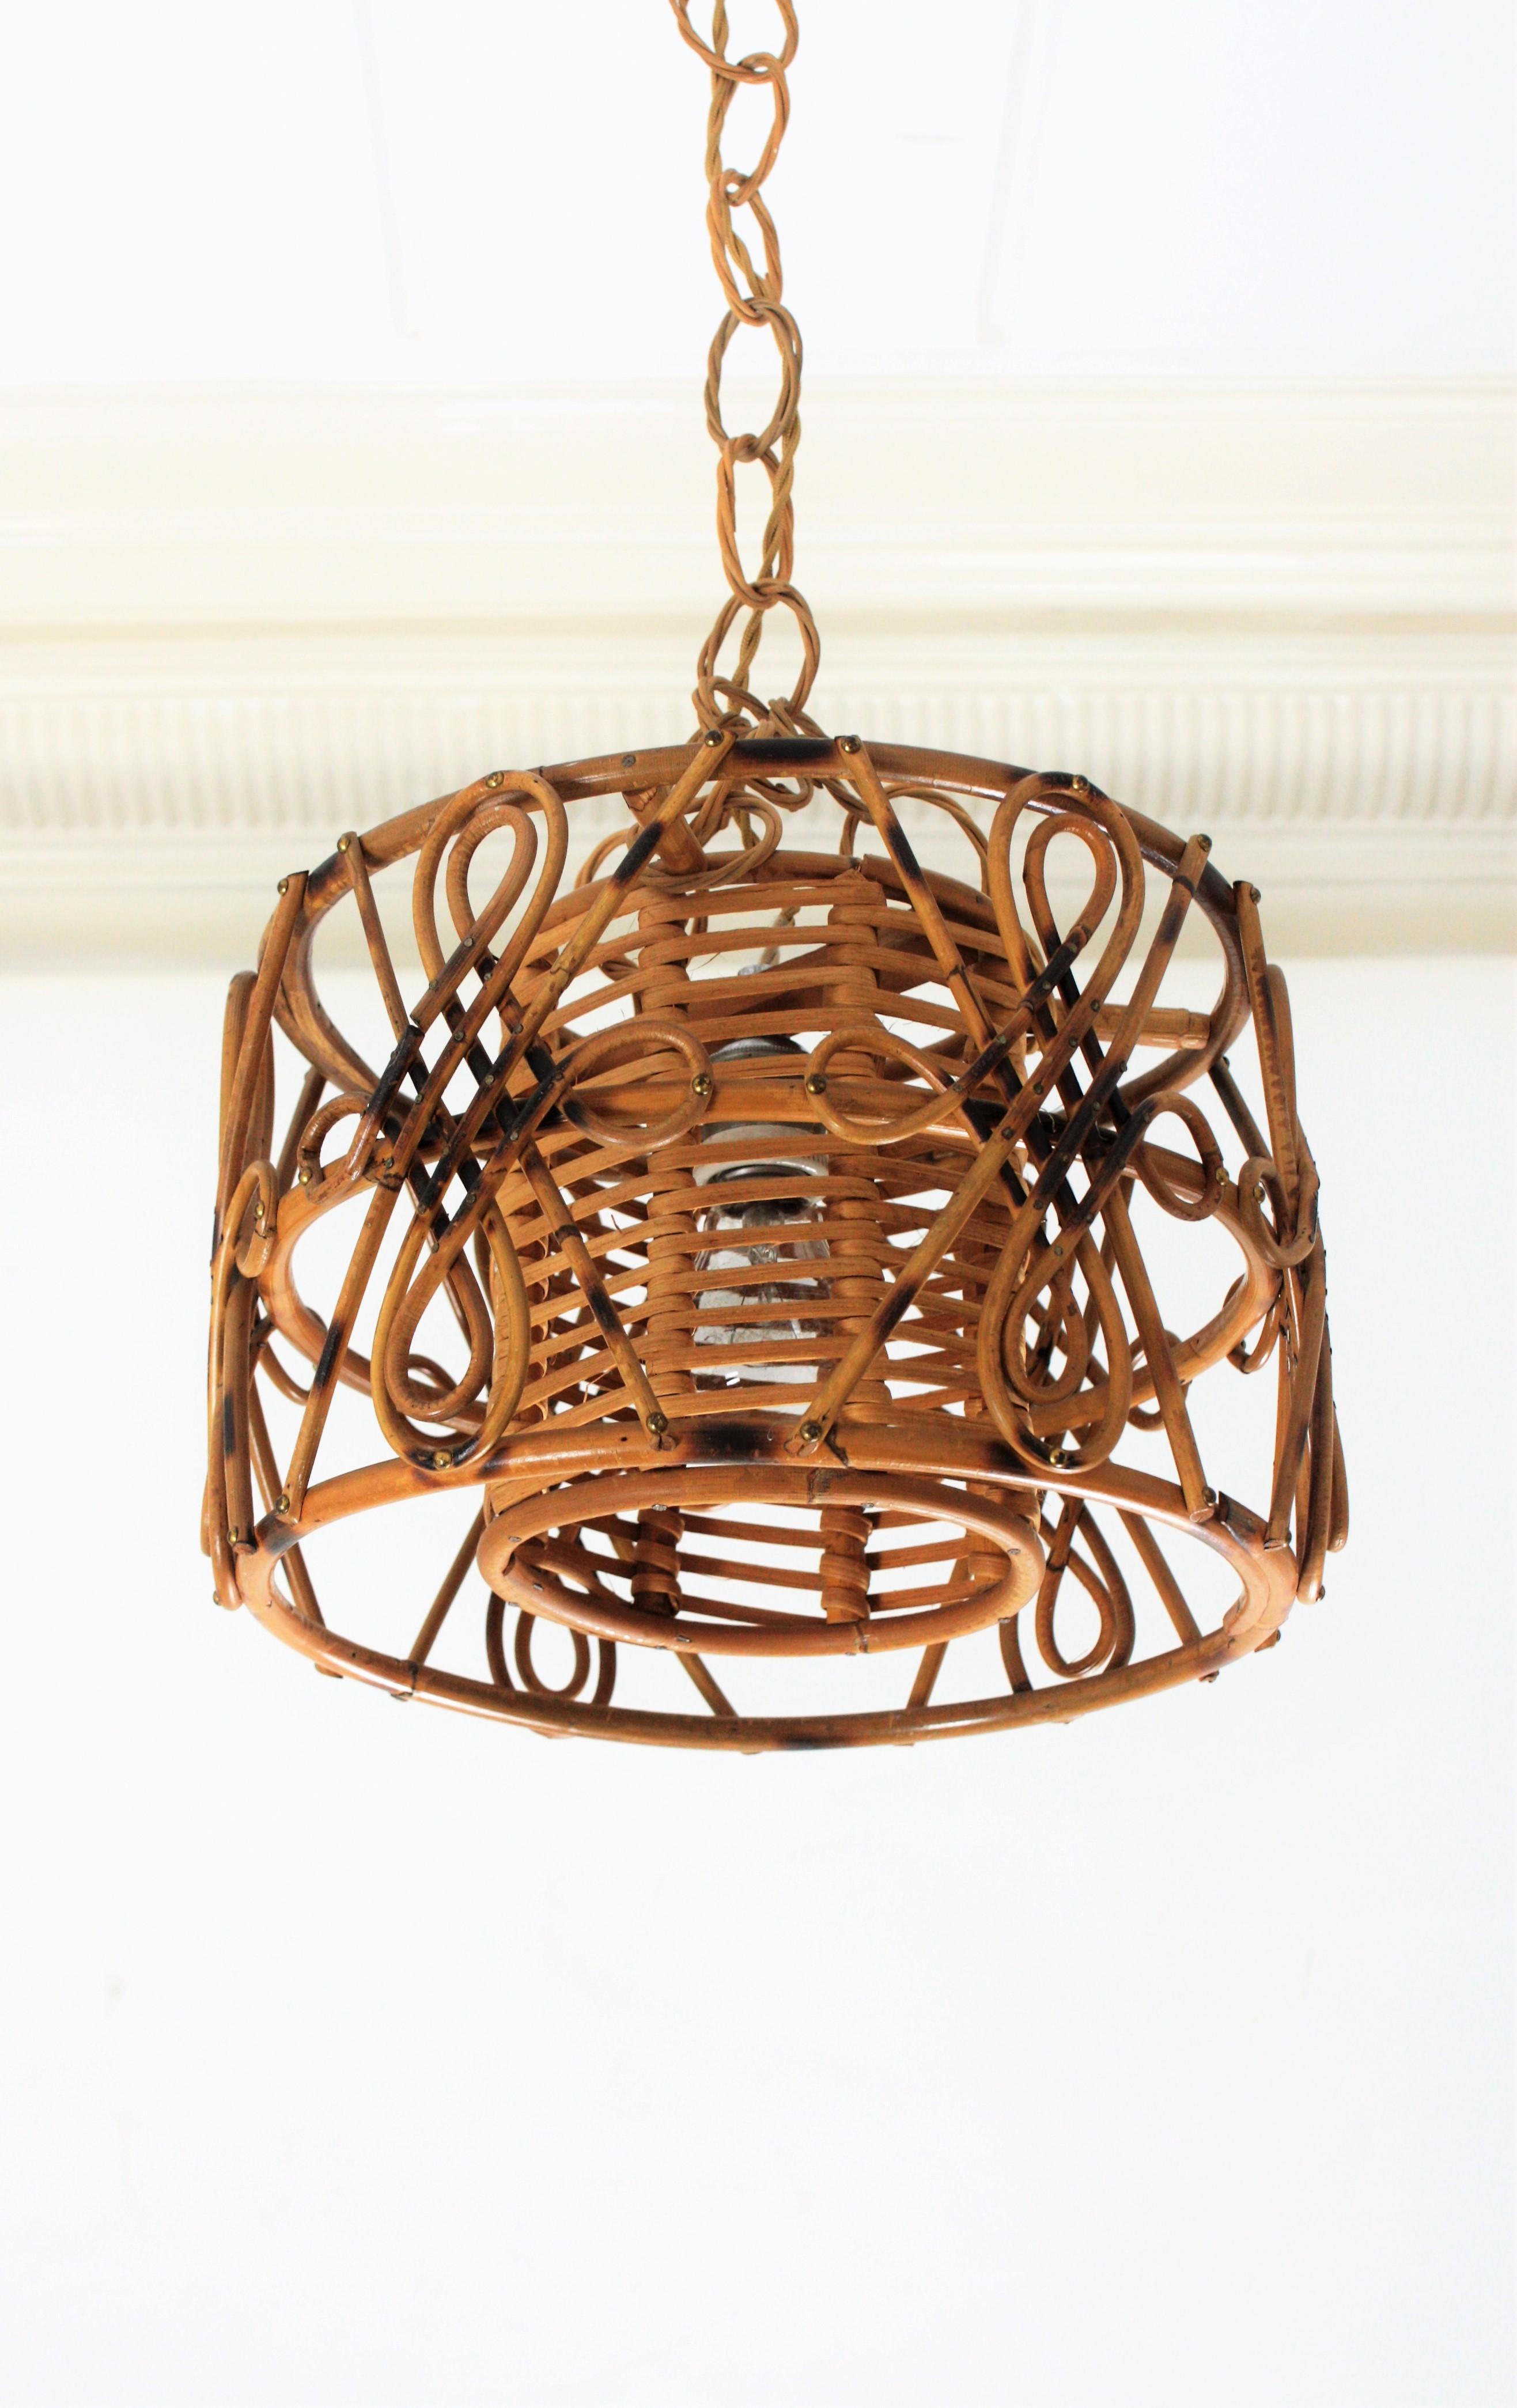 Hand-Crafted Rattan Drum Form Pendant Hanging Light with Chinoiserie Accents, France, 1950s